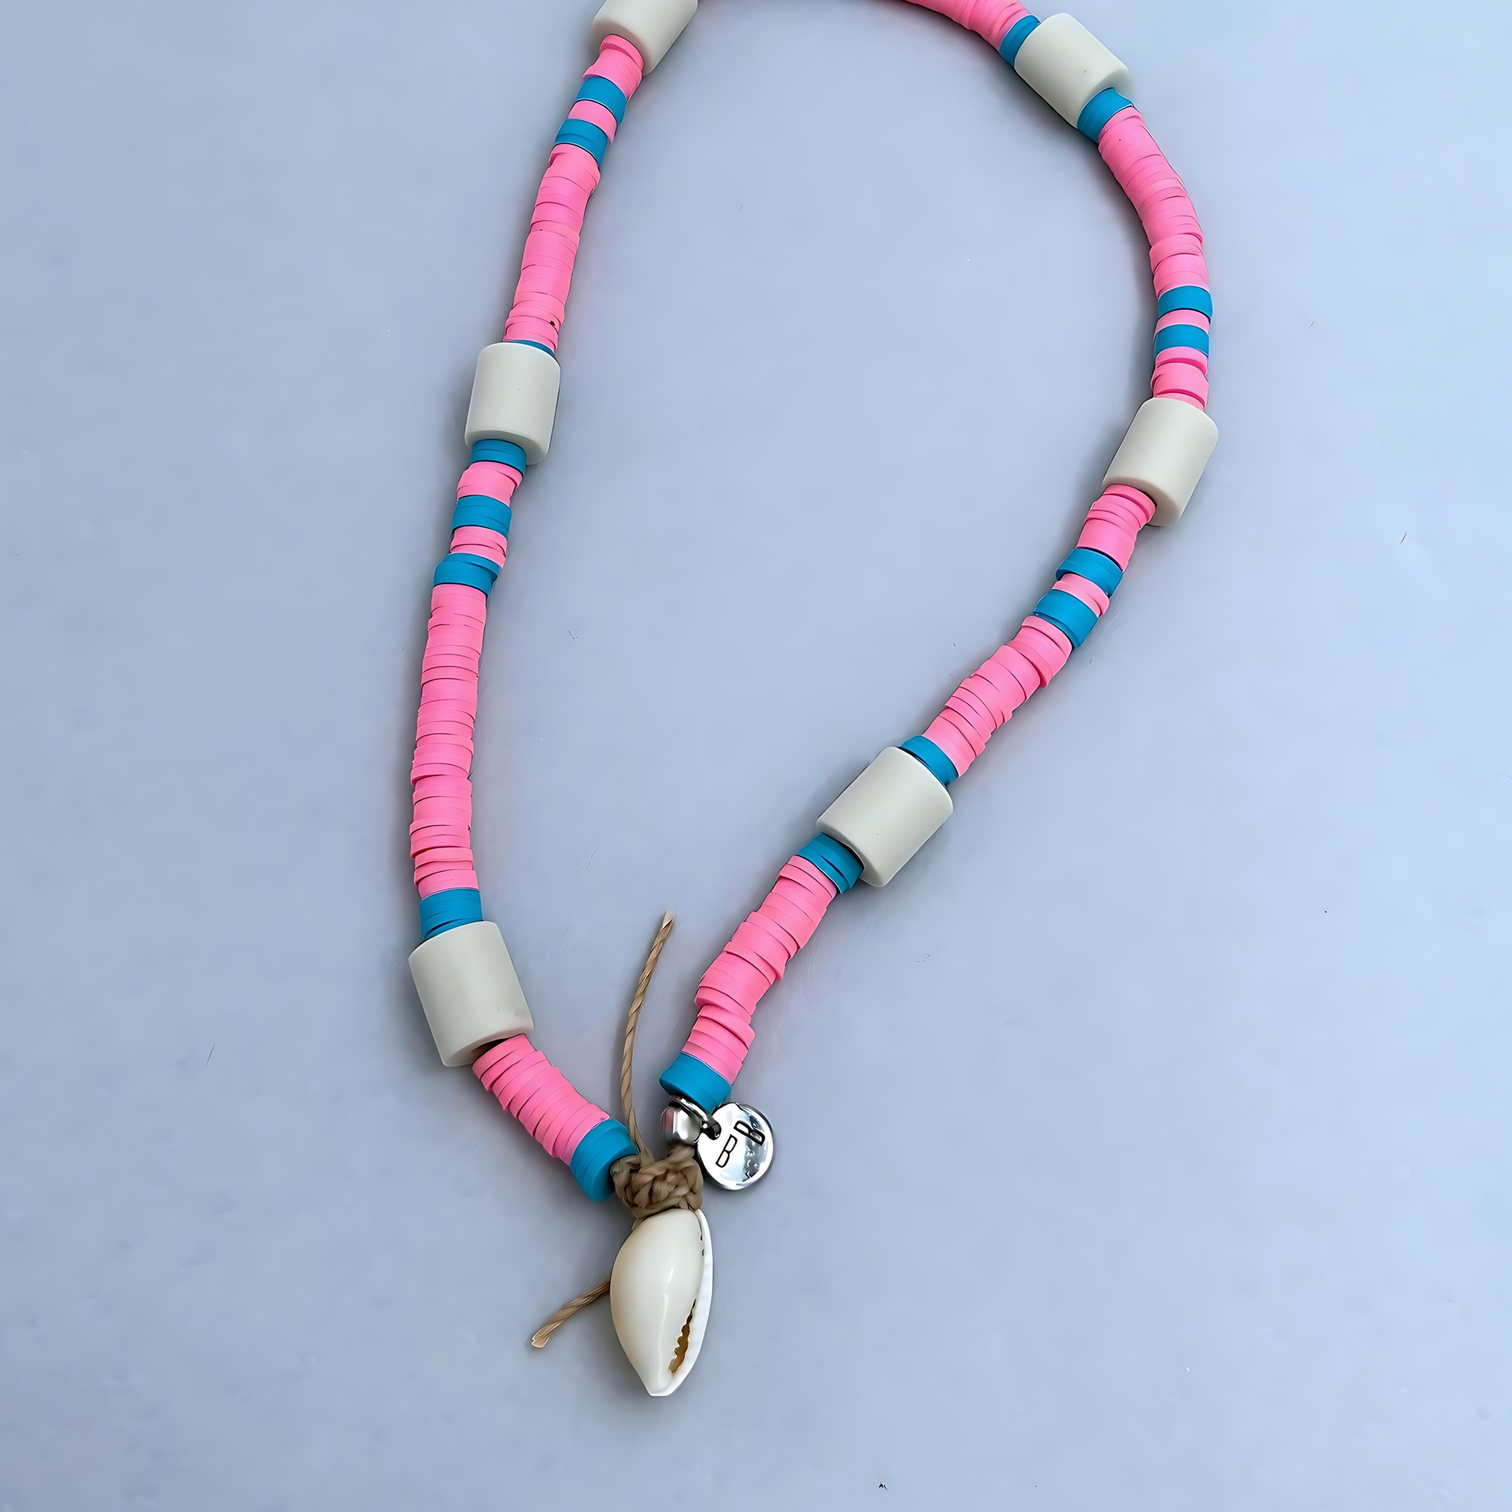 The cool surfer's look anti-tick dog necklace in a bubblegum pink colour. Detail shot.